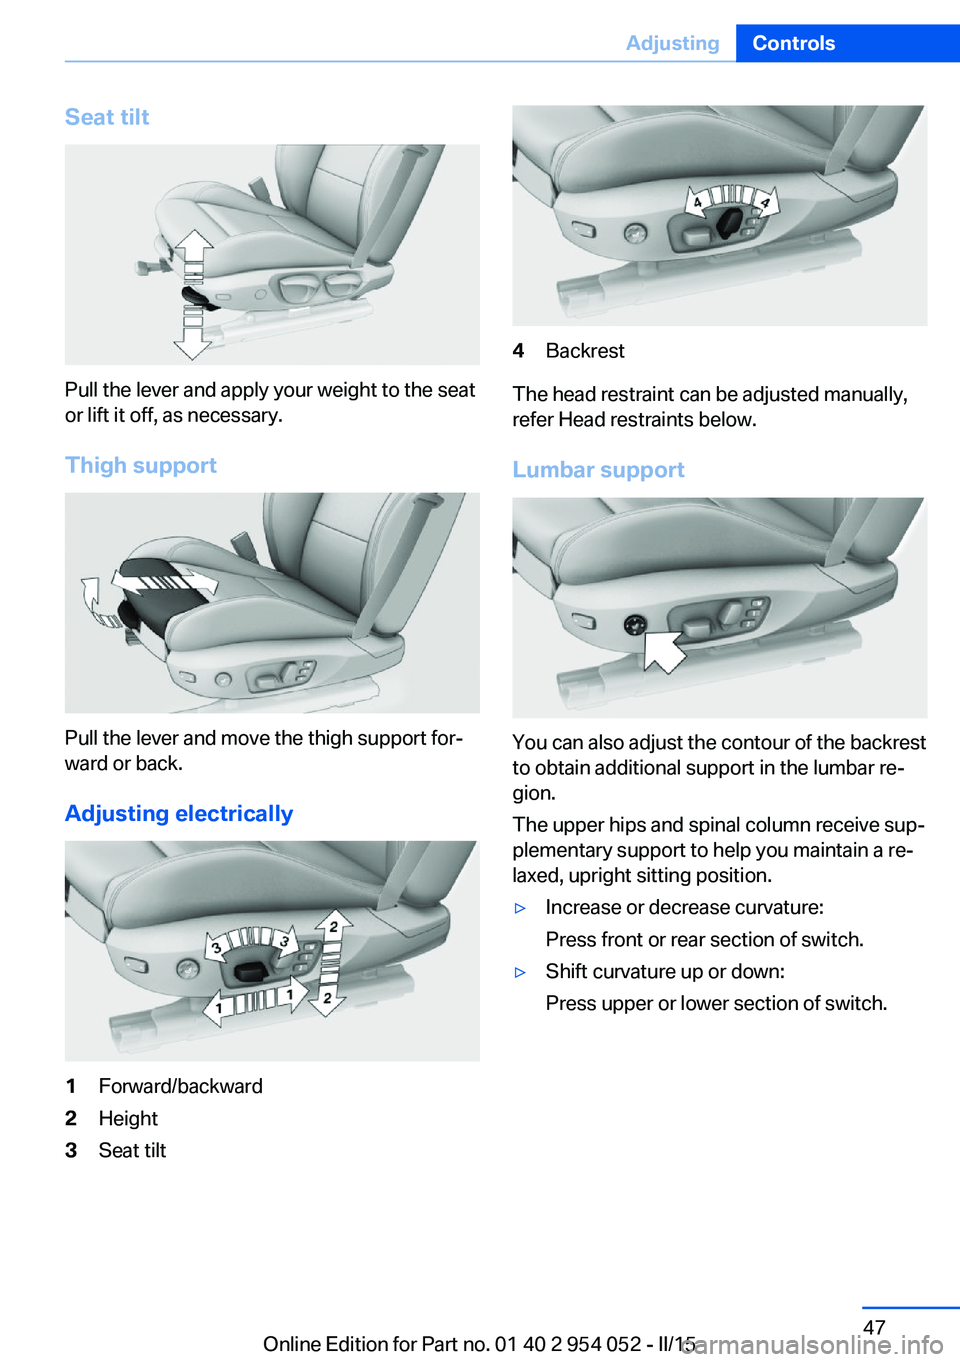 BMW X1 SDRIVE28I 2015 Service Manual Seat tilt
Pull the lever and apply your weight to the seat
or lift it off, as necessary.
Thigh support
Pull the lever and move the thigh support for‐
ward or back.
Adjusting electrically
1Forward/ba